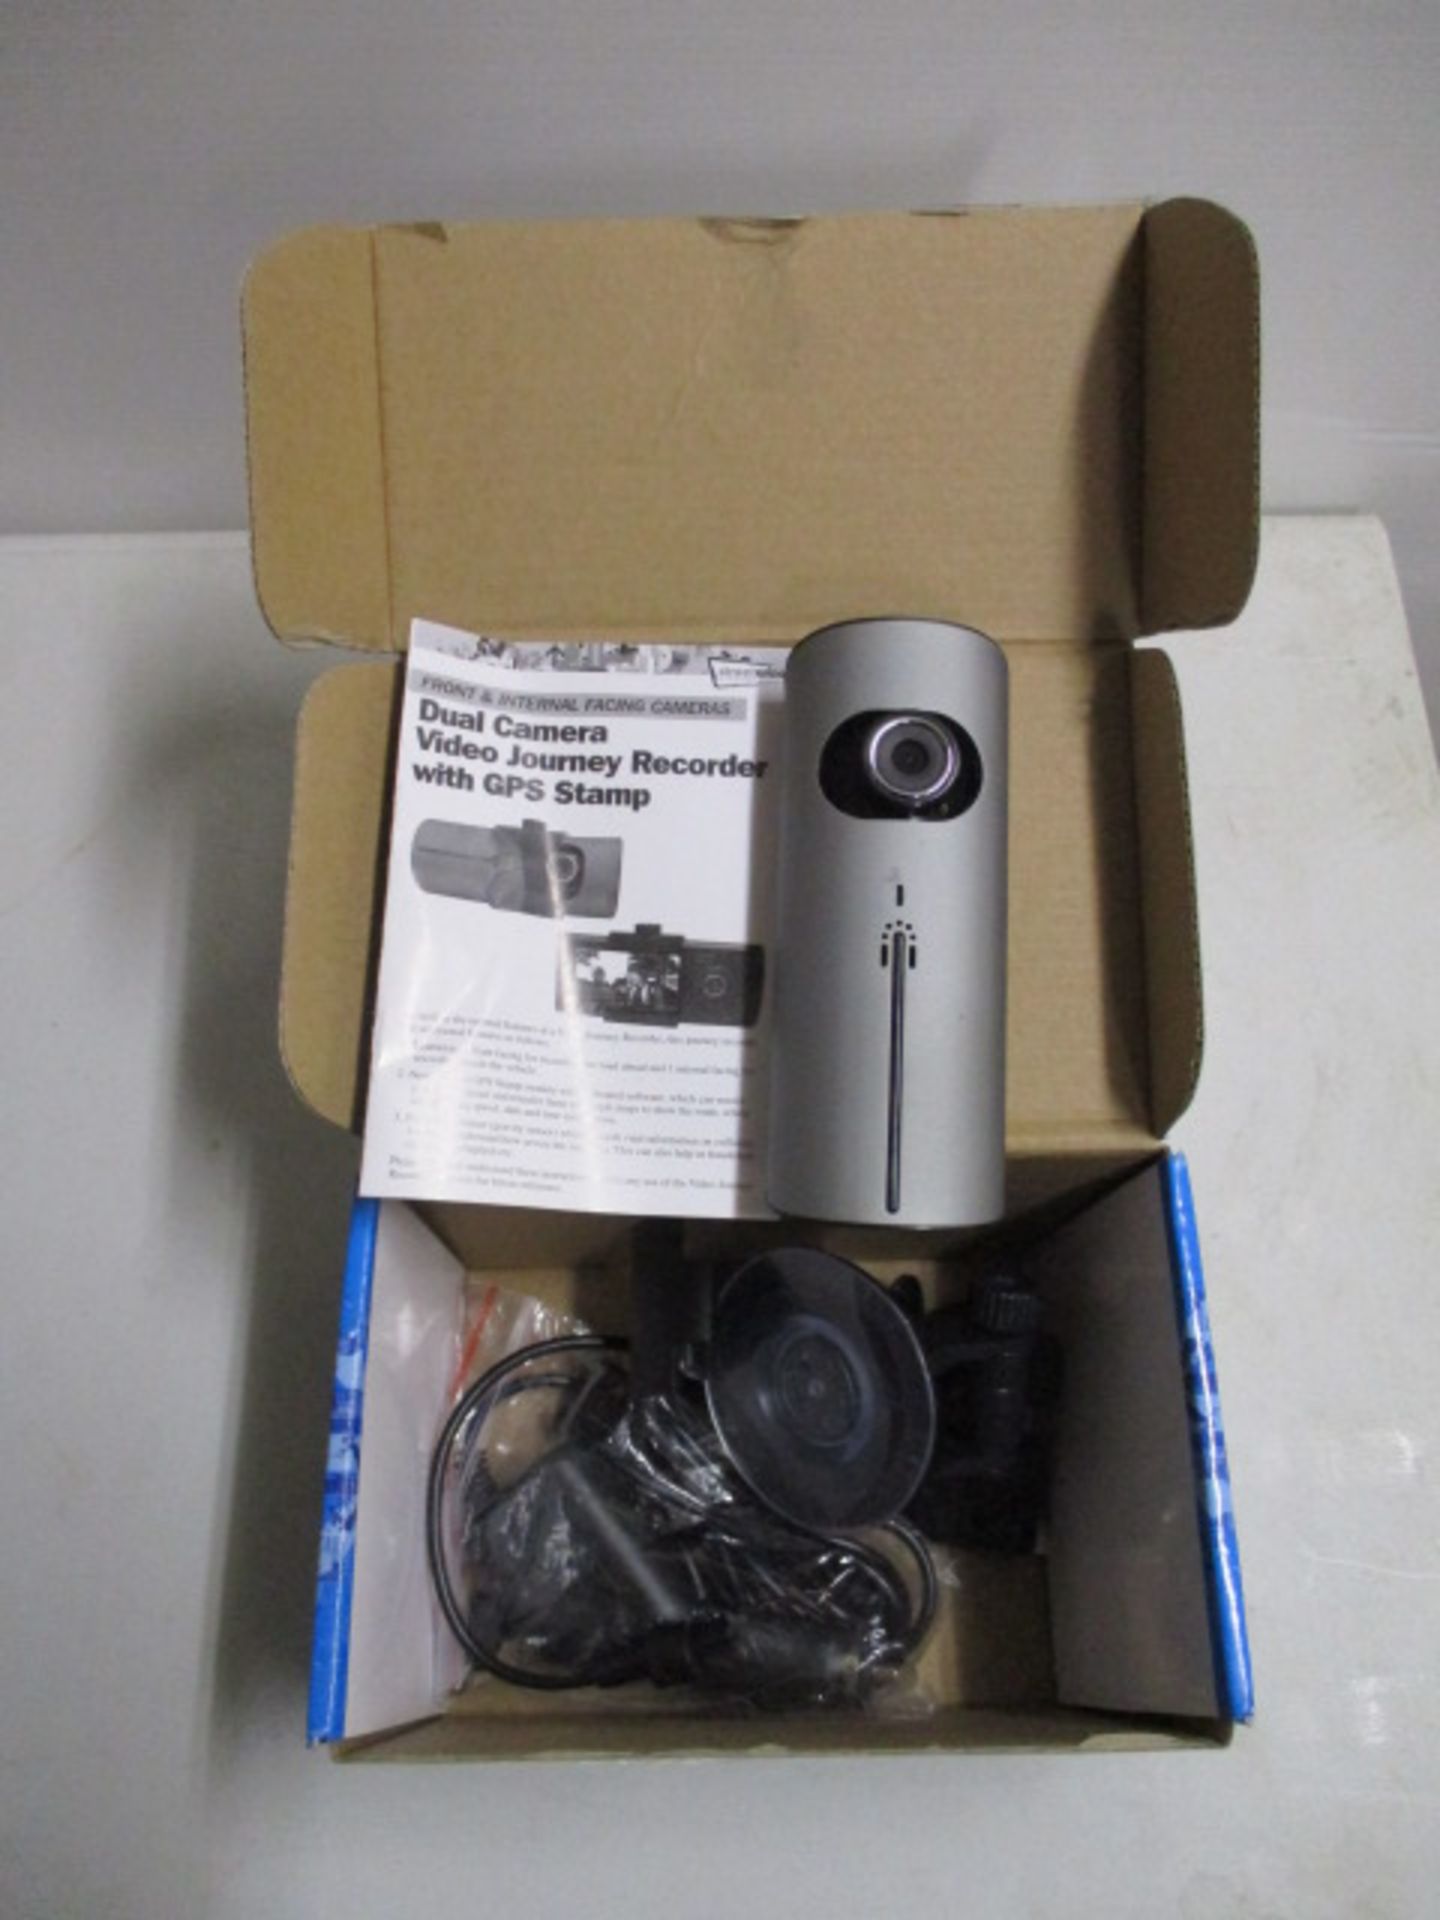 Streetwize Dual Camera video journey recorderwith GPS stamp boxed complete with accessories as - Image 3 of 5